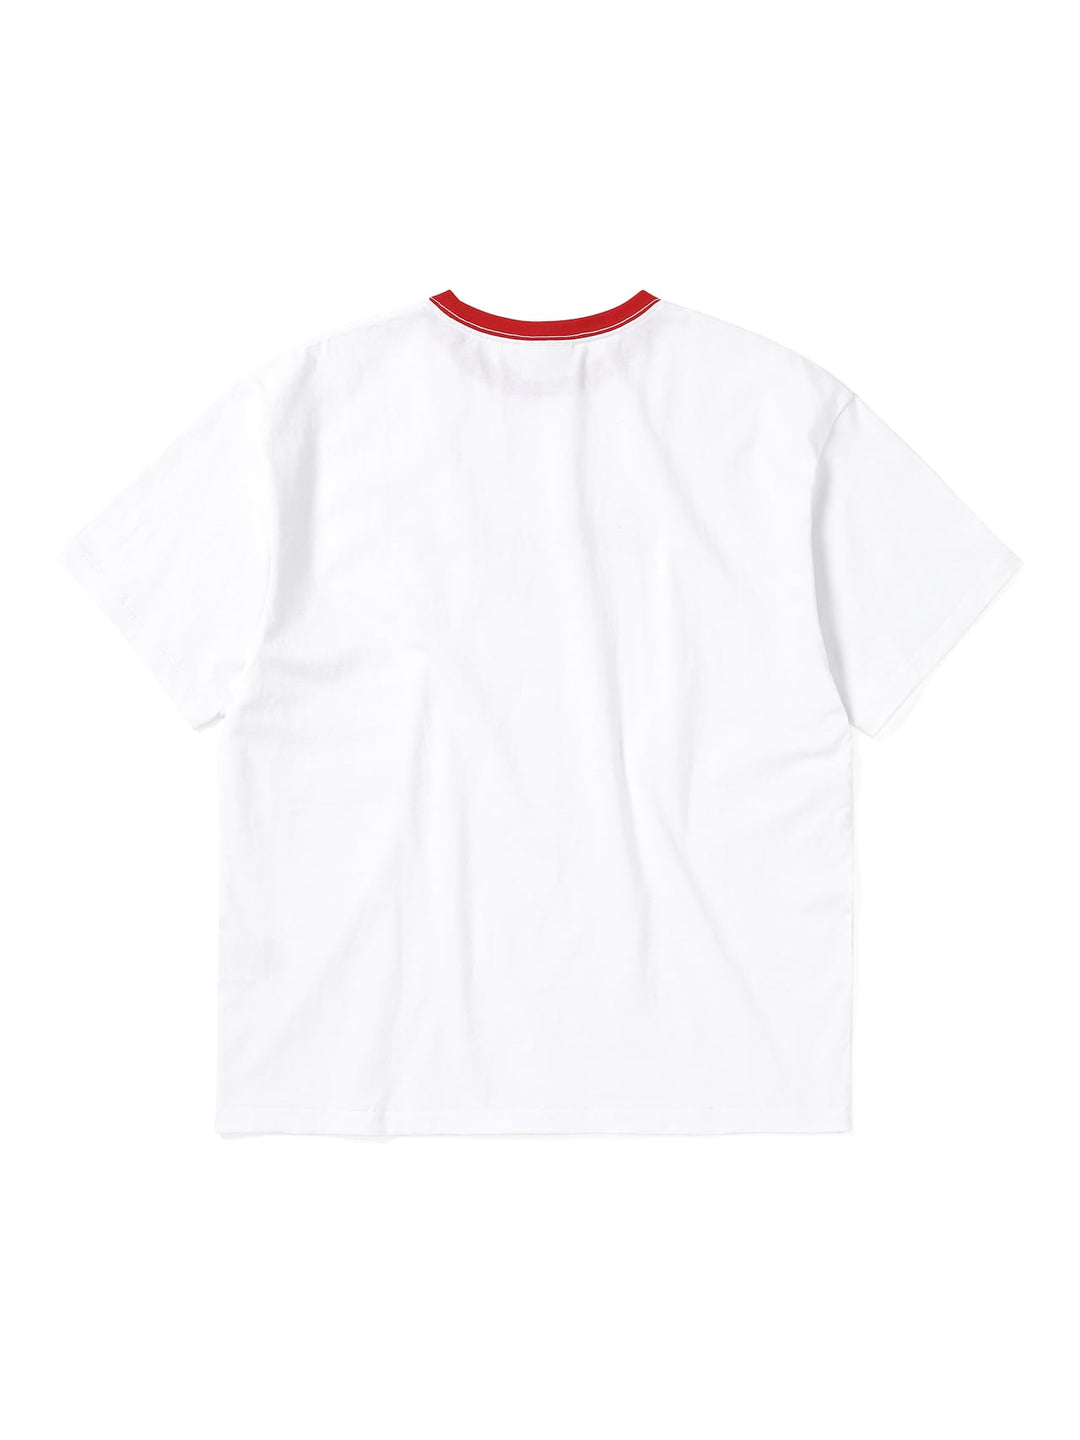 THIS IS NEVER THAT TNT C. 10 TEE-WHITE